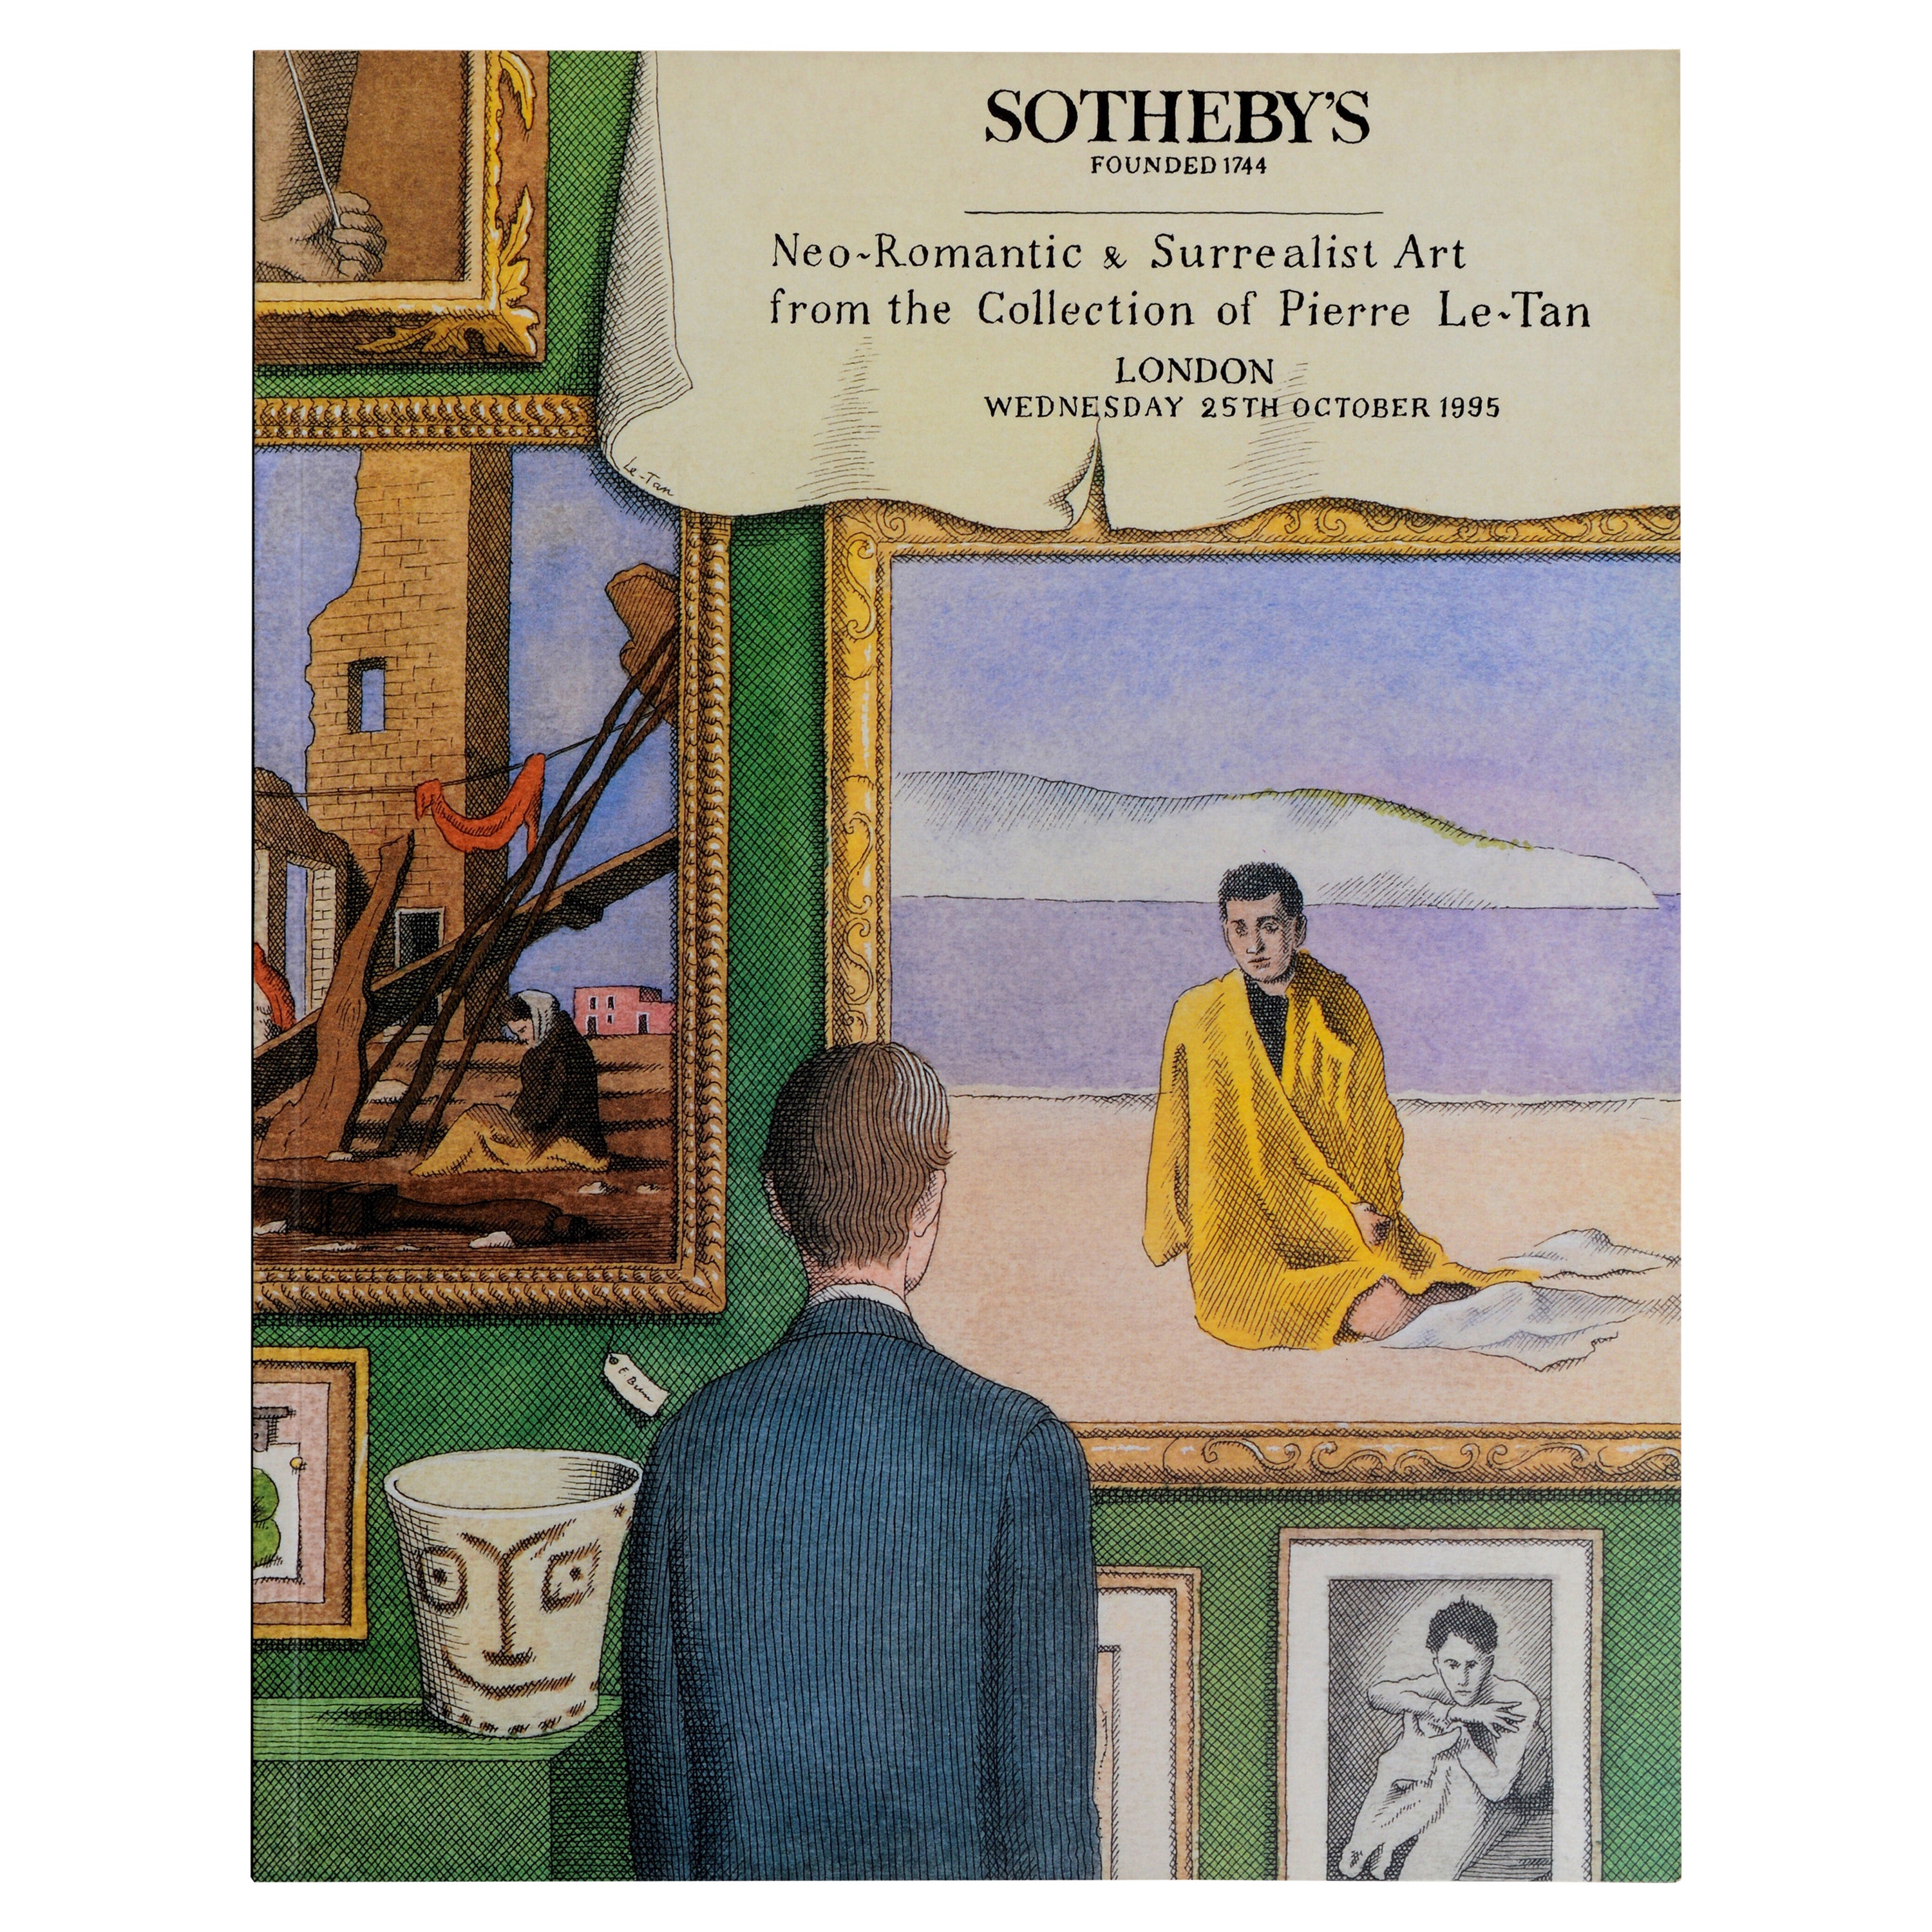 Neo-Romantic and Surrealist Art from the Collection of Pierre Le-Tan, Sotheby's